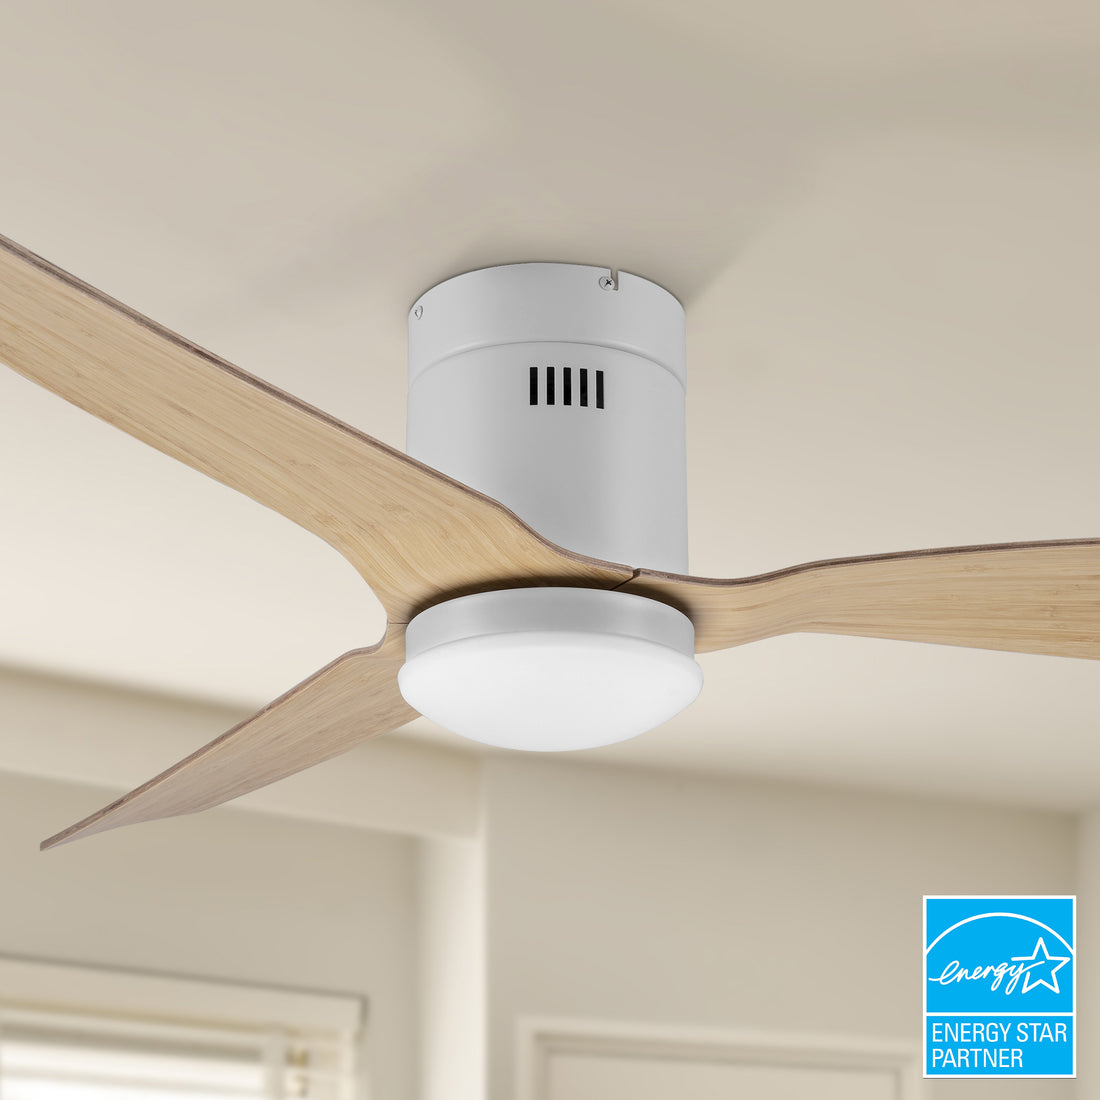 Smafan Elite Smart Ceiling Fan is compatible with Alexa, Siri, Google Assistant, smart app. It will bring a modern touch to your home décor. Elegant, quietness, and energy saving are some of its advantages. Available for outdoor/indoor use. 